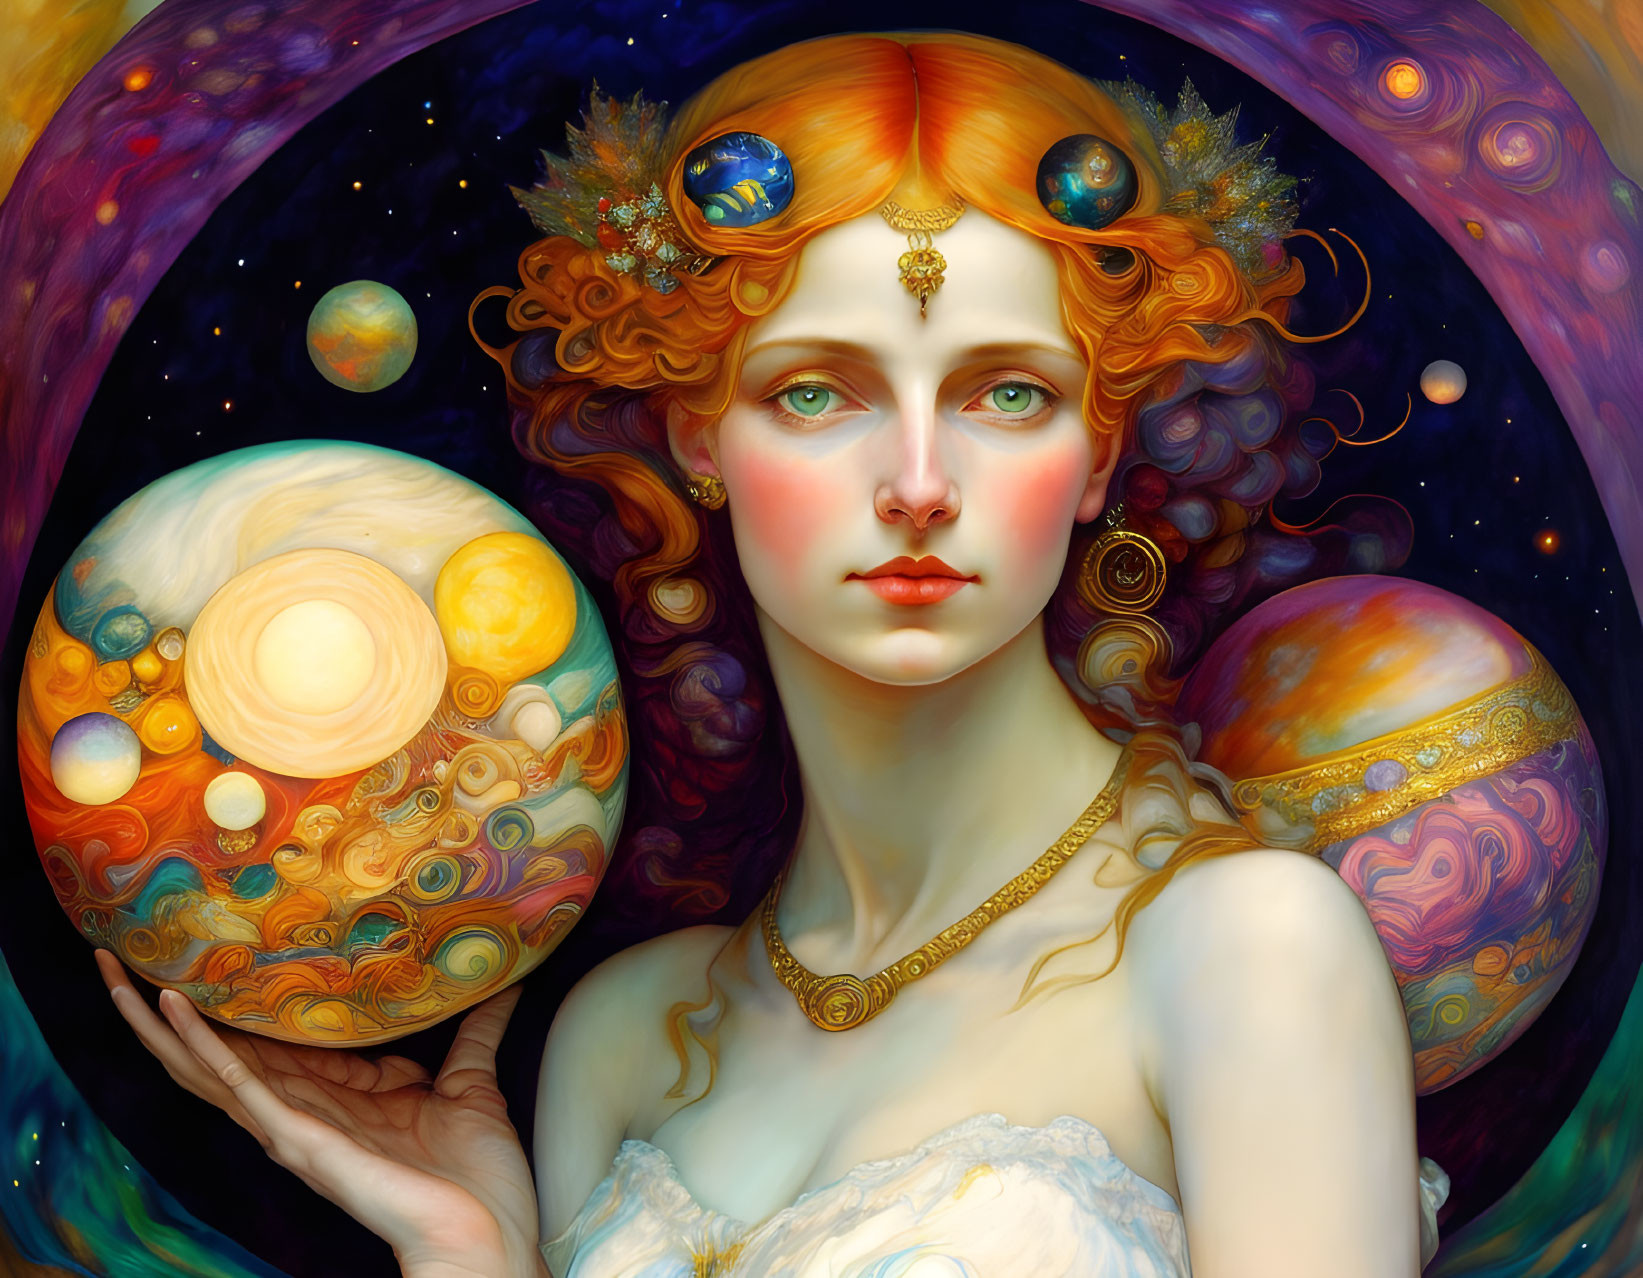 Dazzling Beauty With Planets